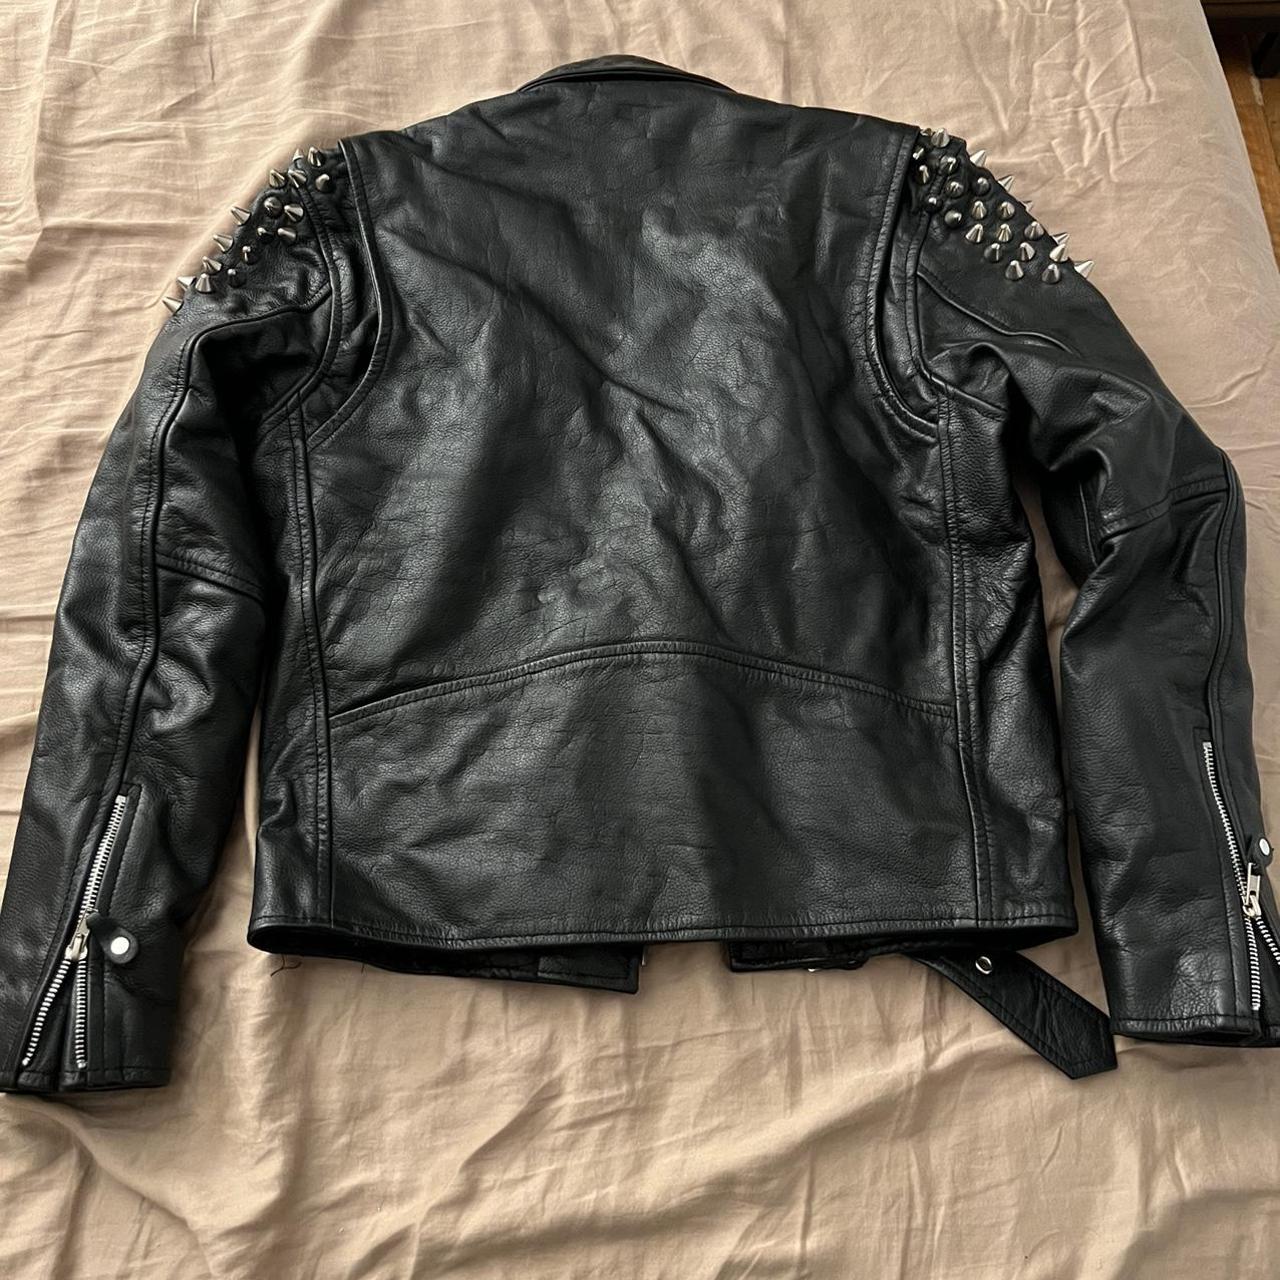 Product Image 2 - The Ragged Priest leather jacket